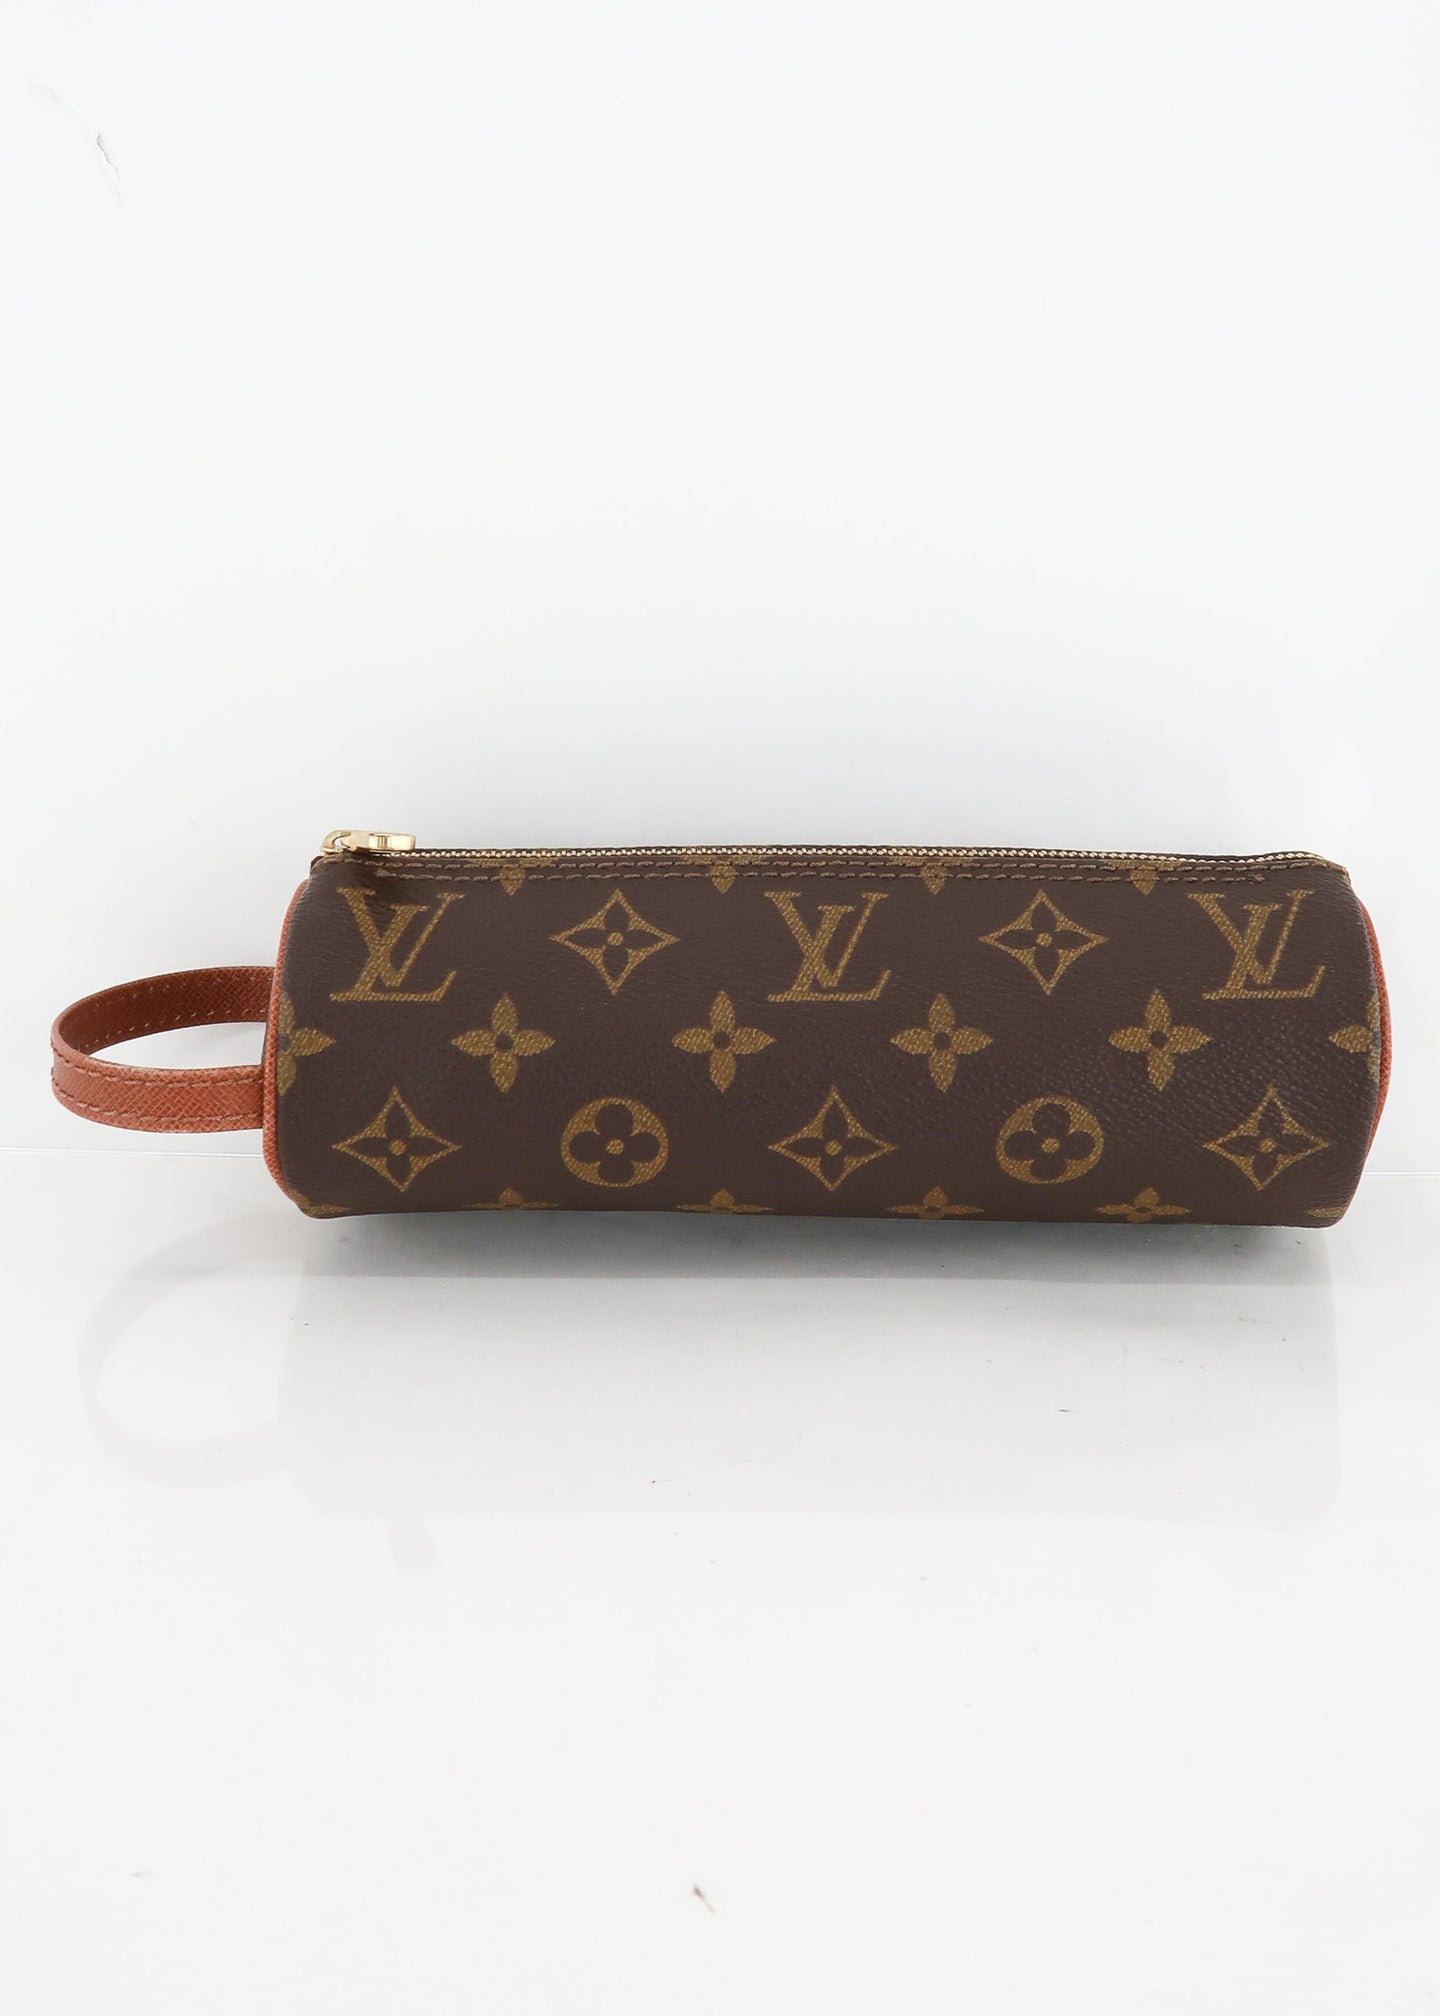 Brown and tan Monogram coated canvas Louis Vuitton Trousse Ronde